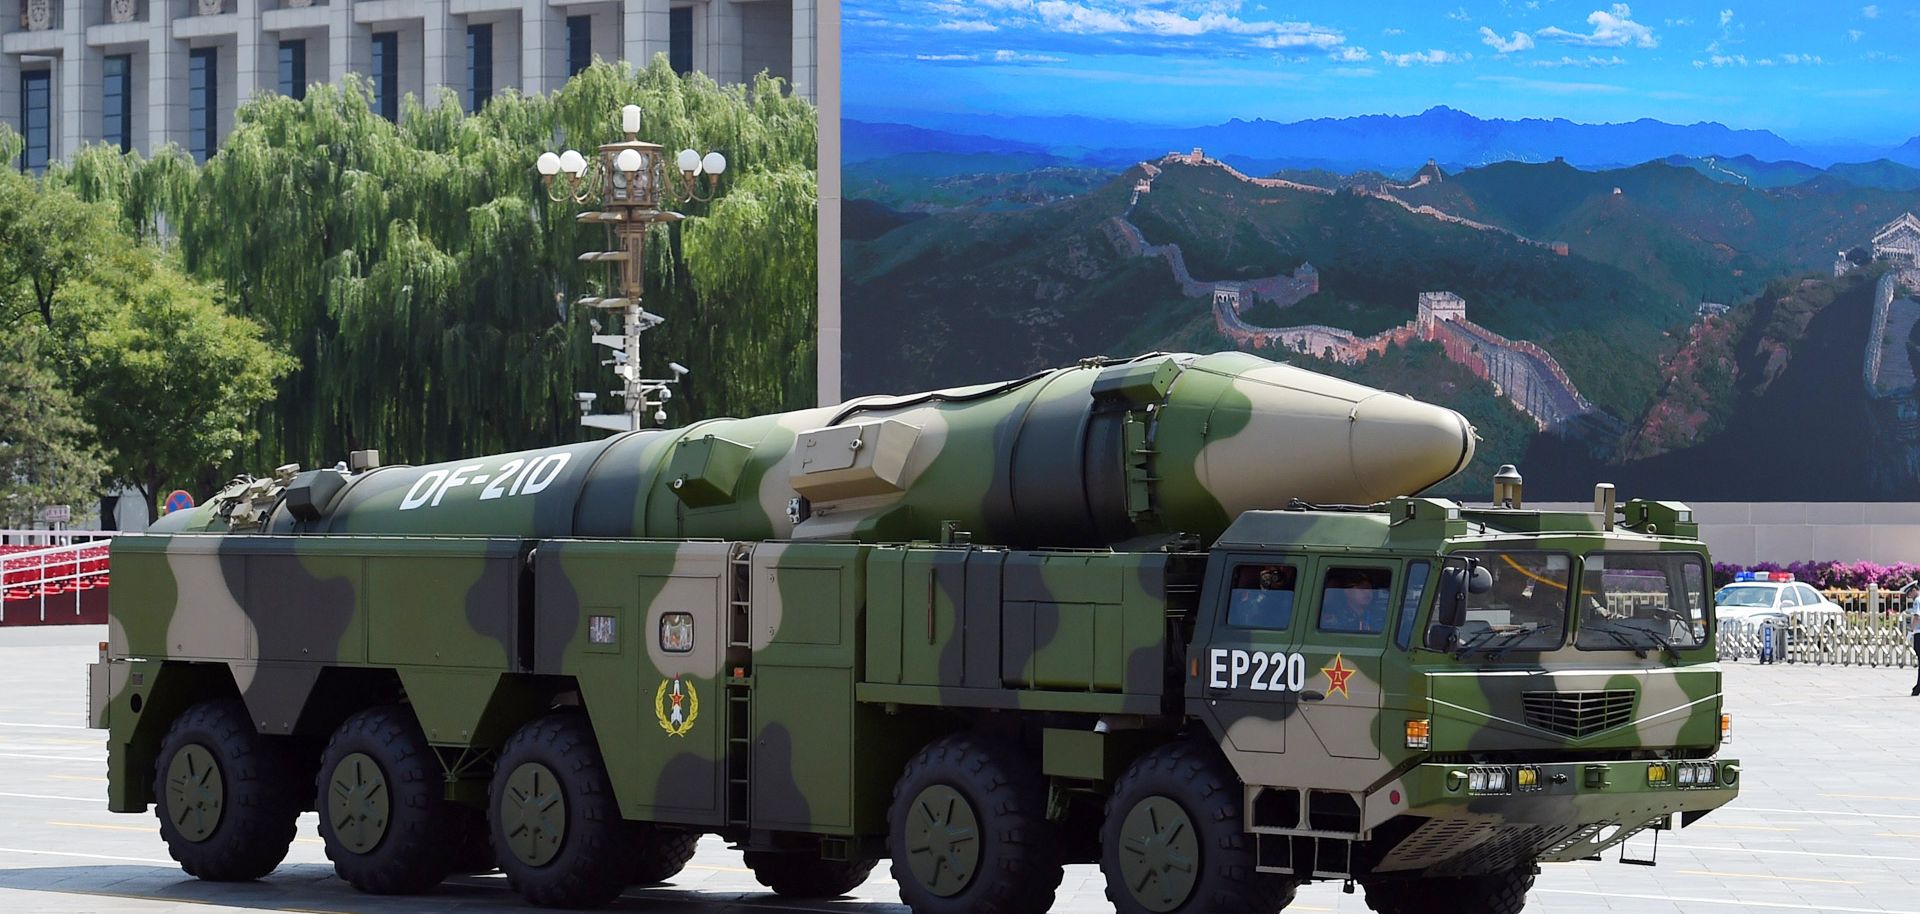 A Chinese Nuclear Deterrent Aimed at the U.S.